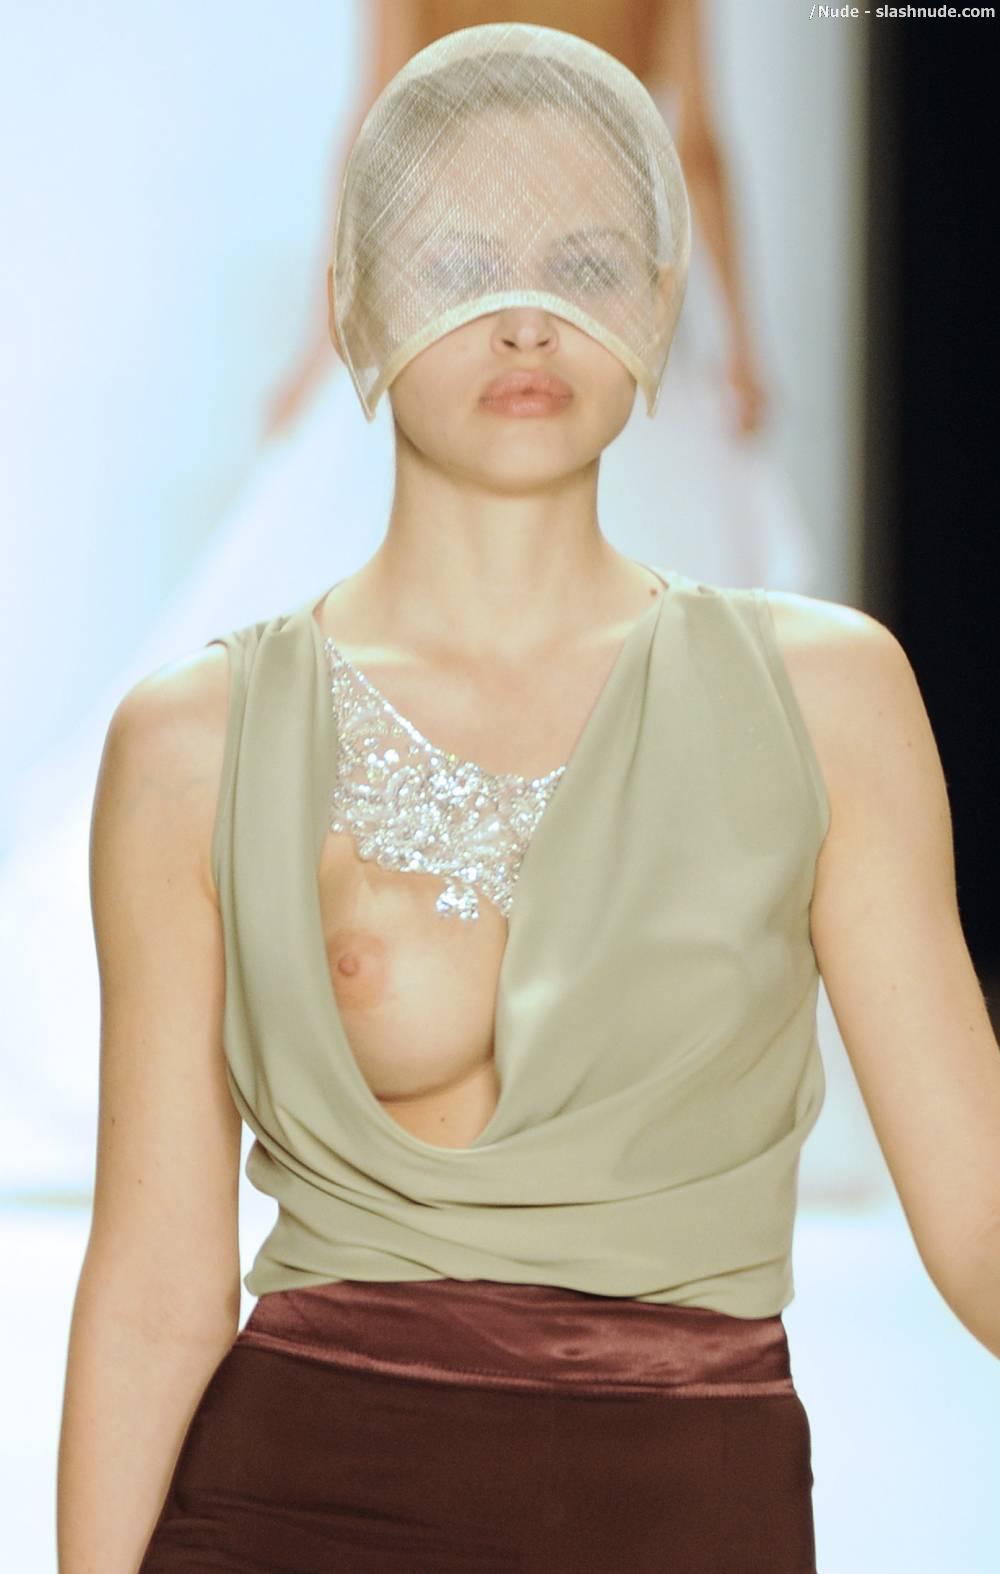 Hana Nitsche Breast Slips Out Of Her Top On Runway 4